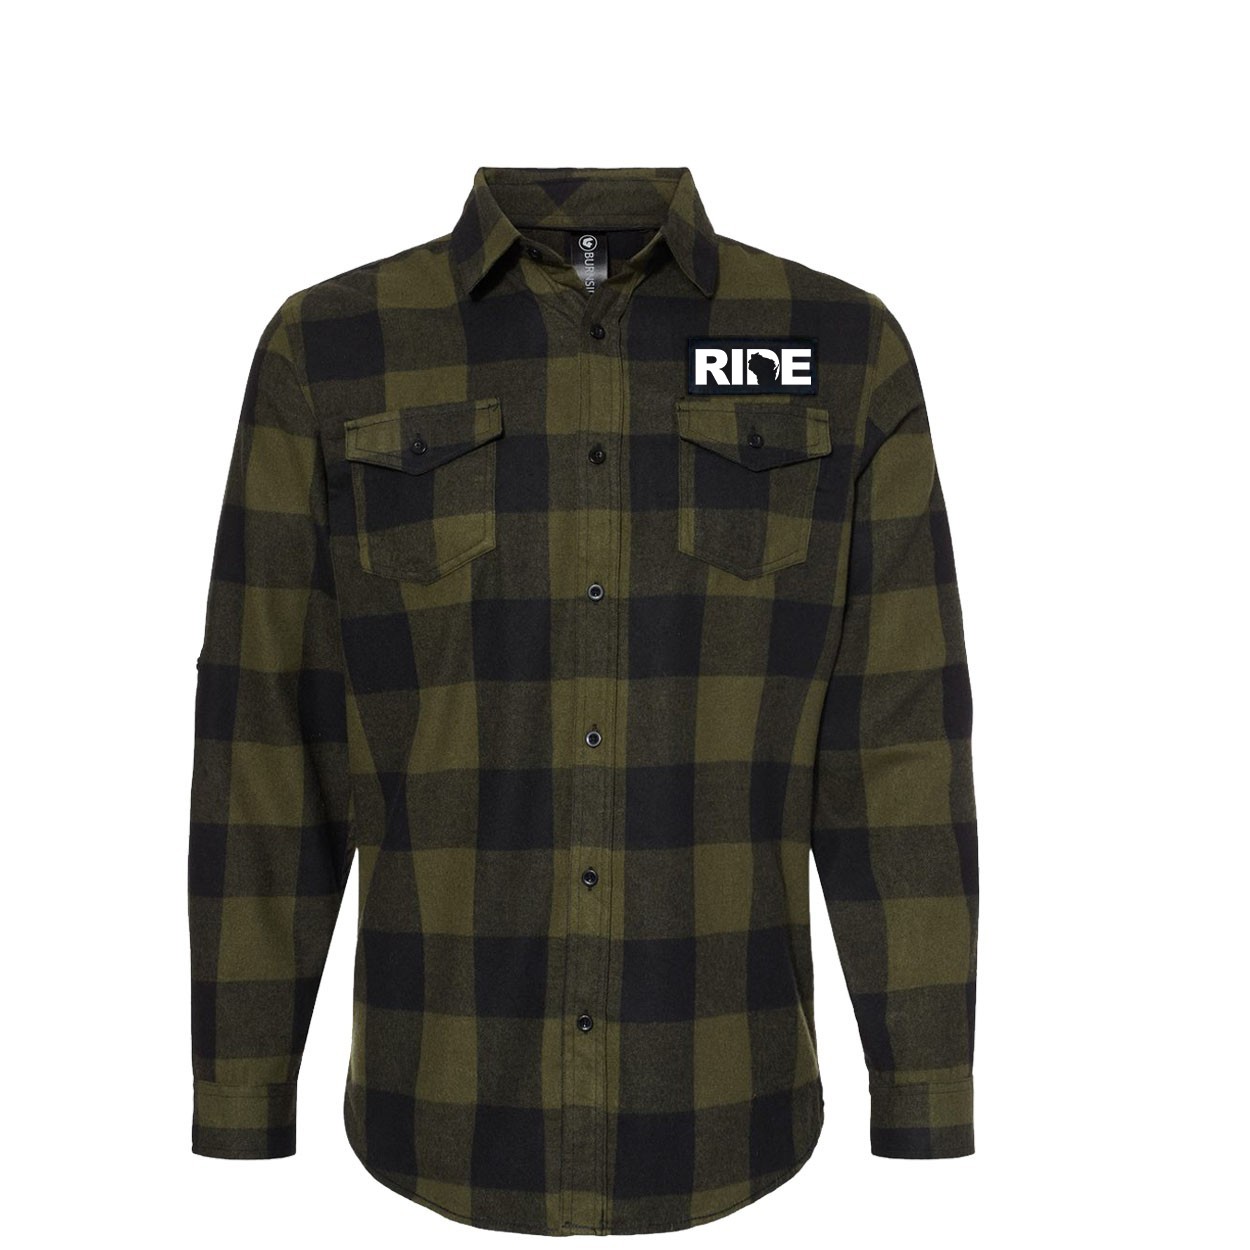 Ride Wisconsin Classic Unisex Long Sleeve Woven Patch Flannel Shirt Army/Black (White Logo)